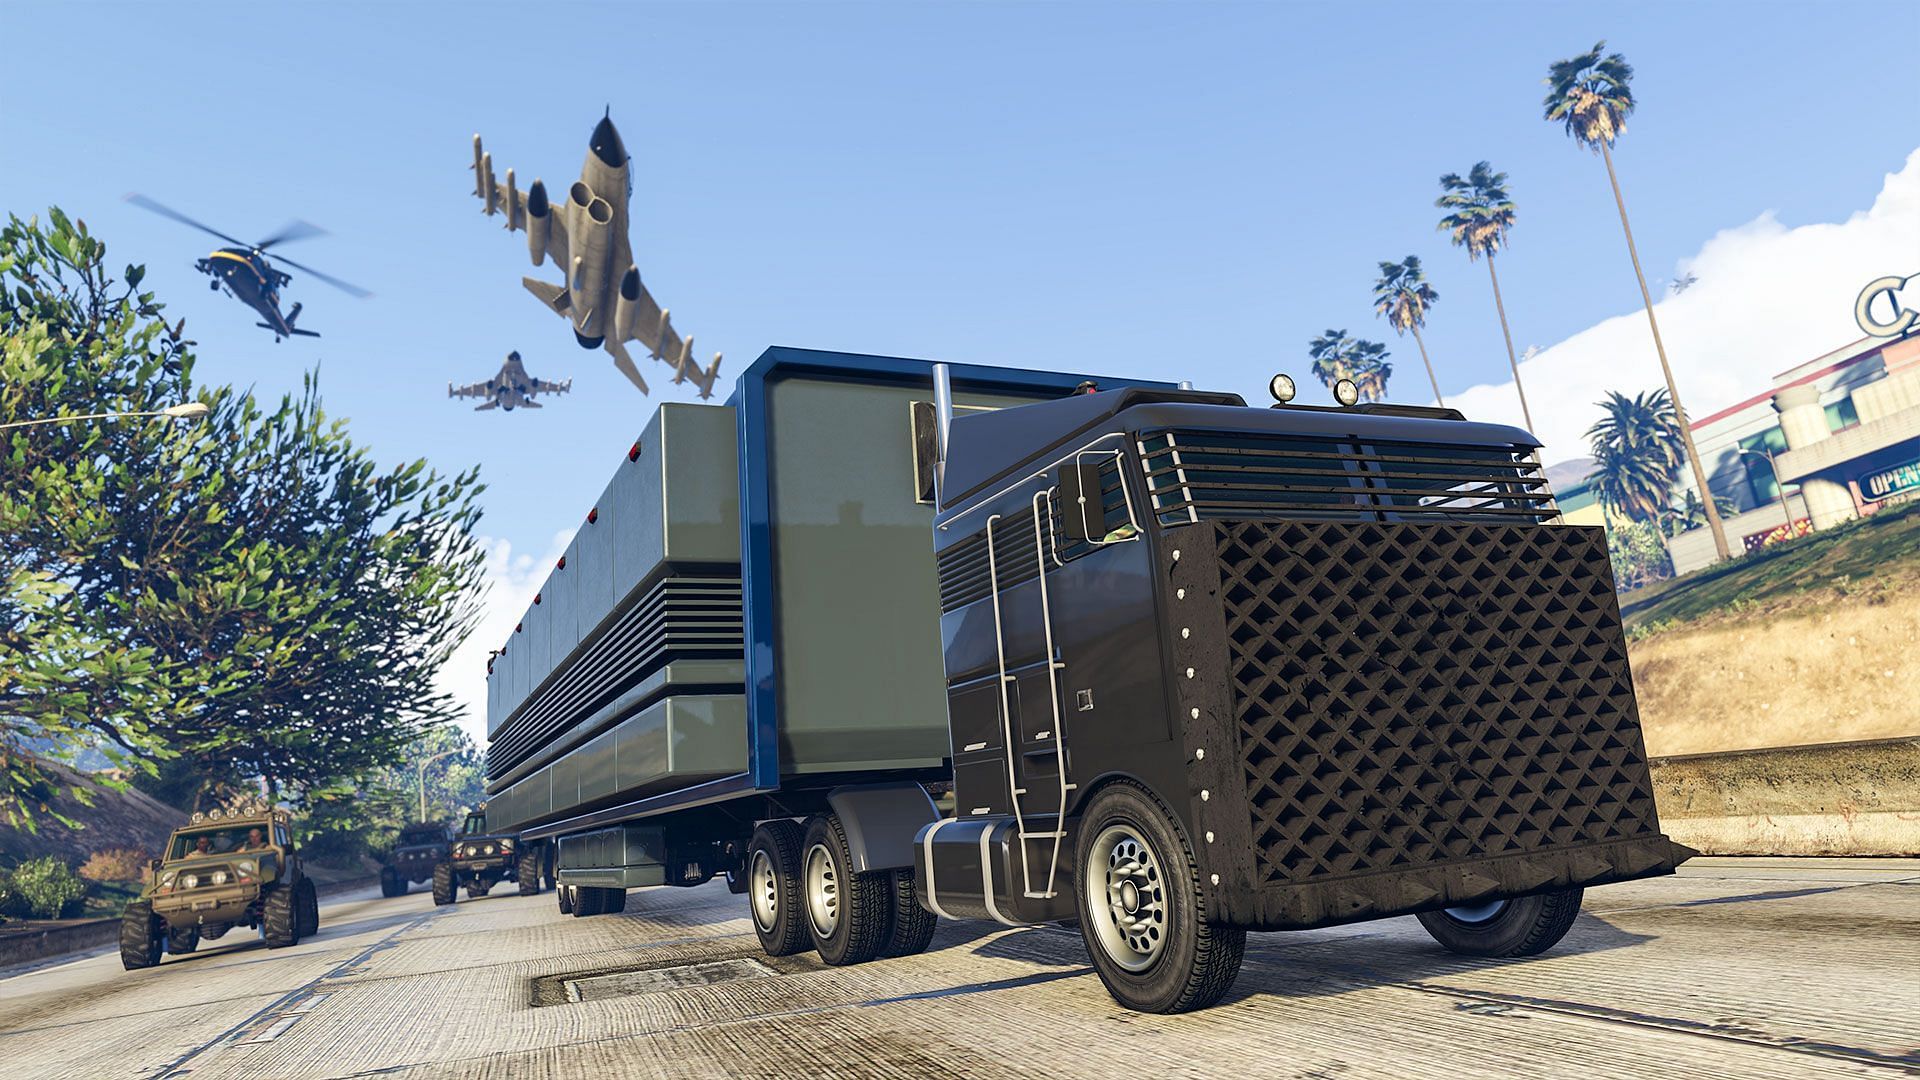 Starting these missions always begins in the Mobile Operations Center (Image via Rockstar Games)